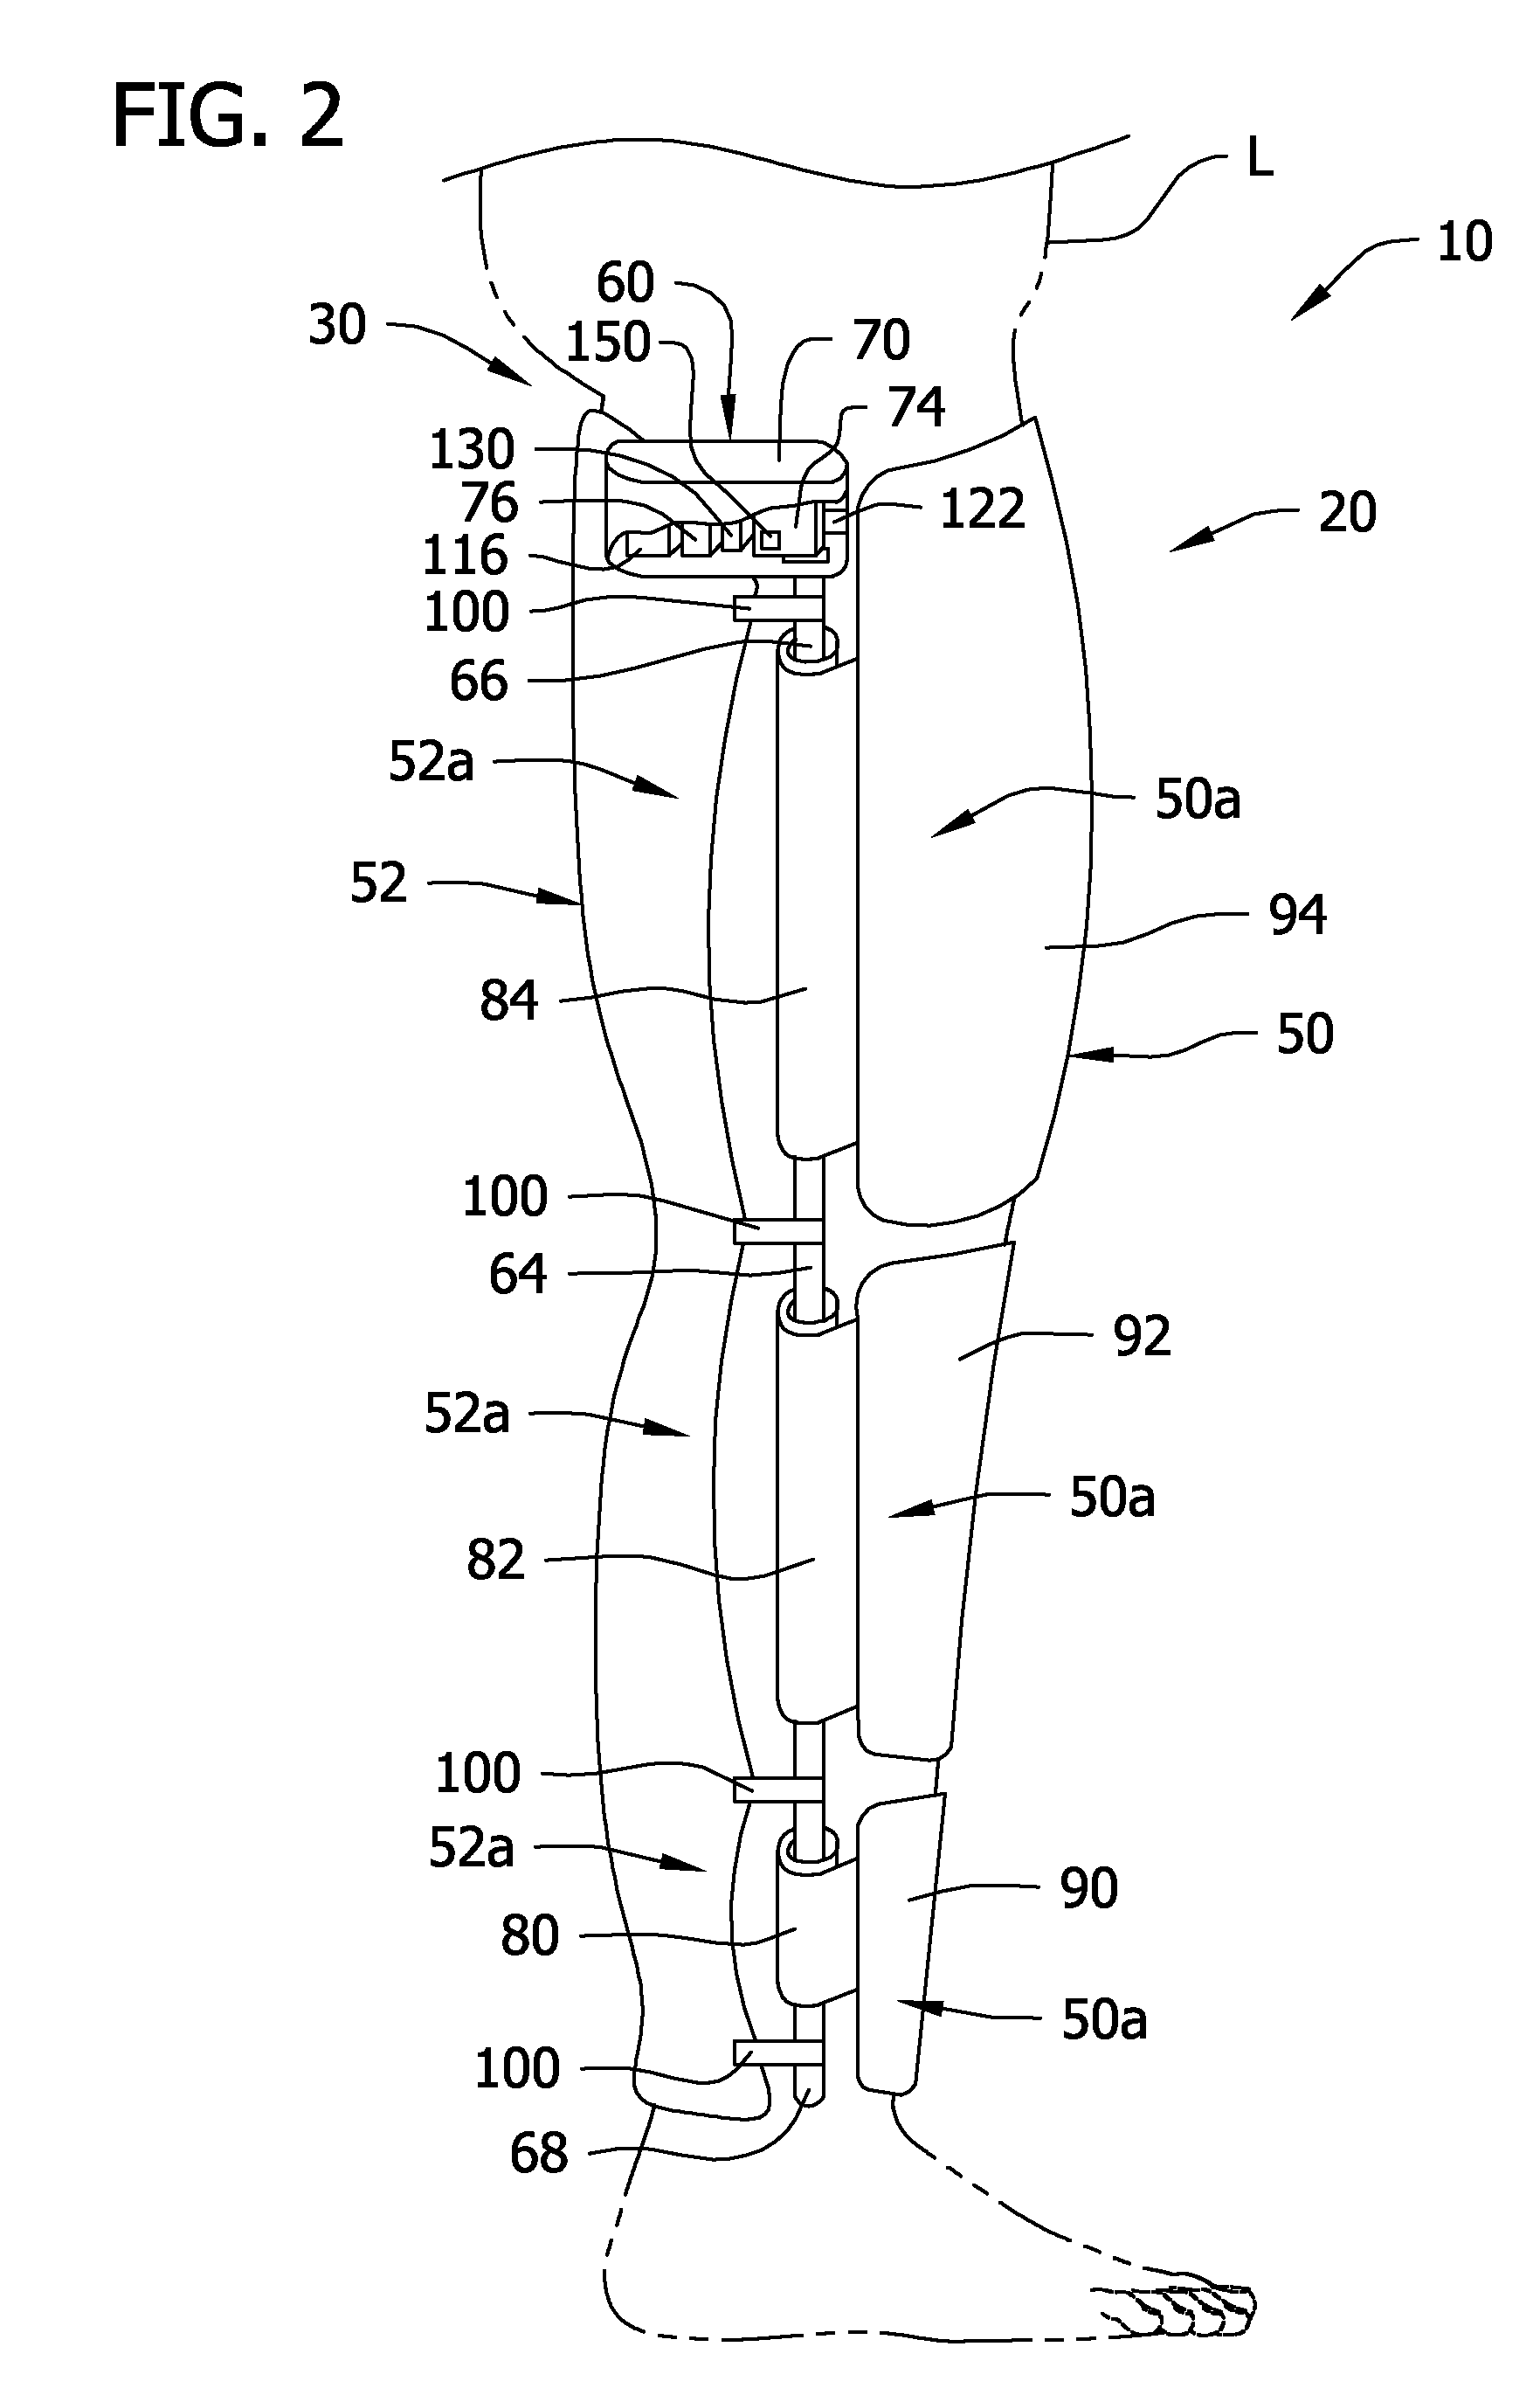 Portable, self-contained compression device